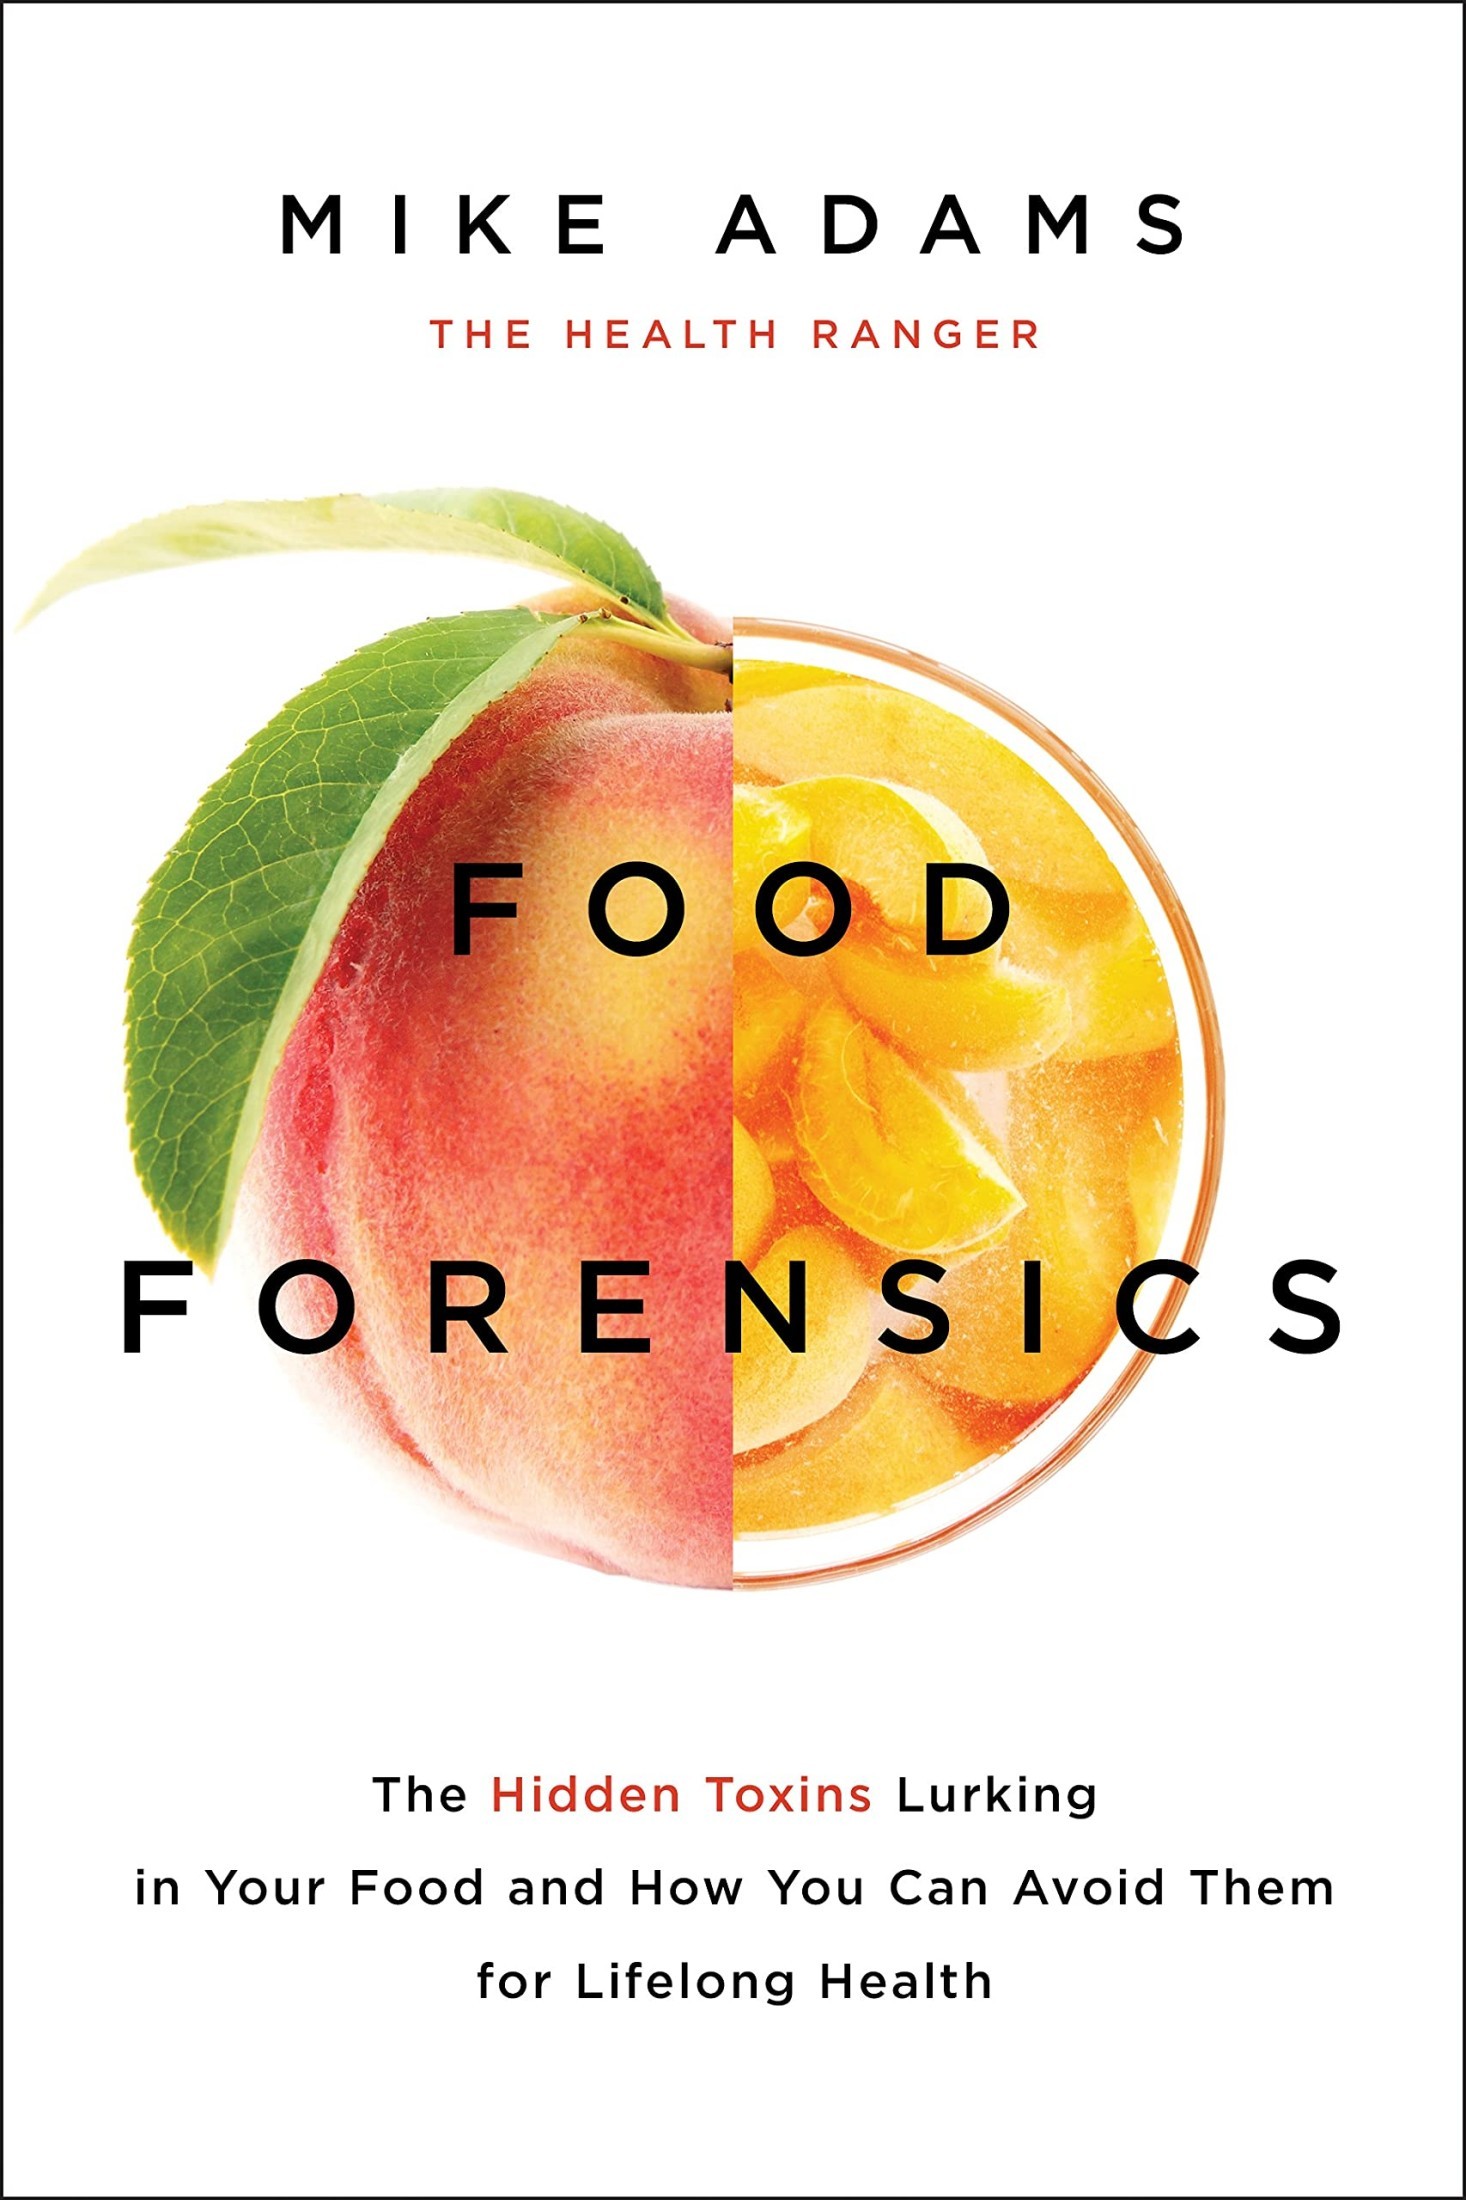 Food Forensics: The Hidden Toxins Lurking in Your Food and How You Can Avoid Them for Lifelong Health